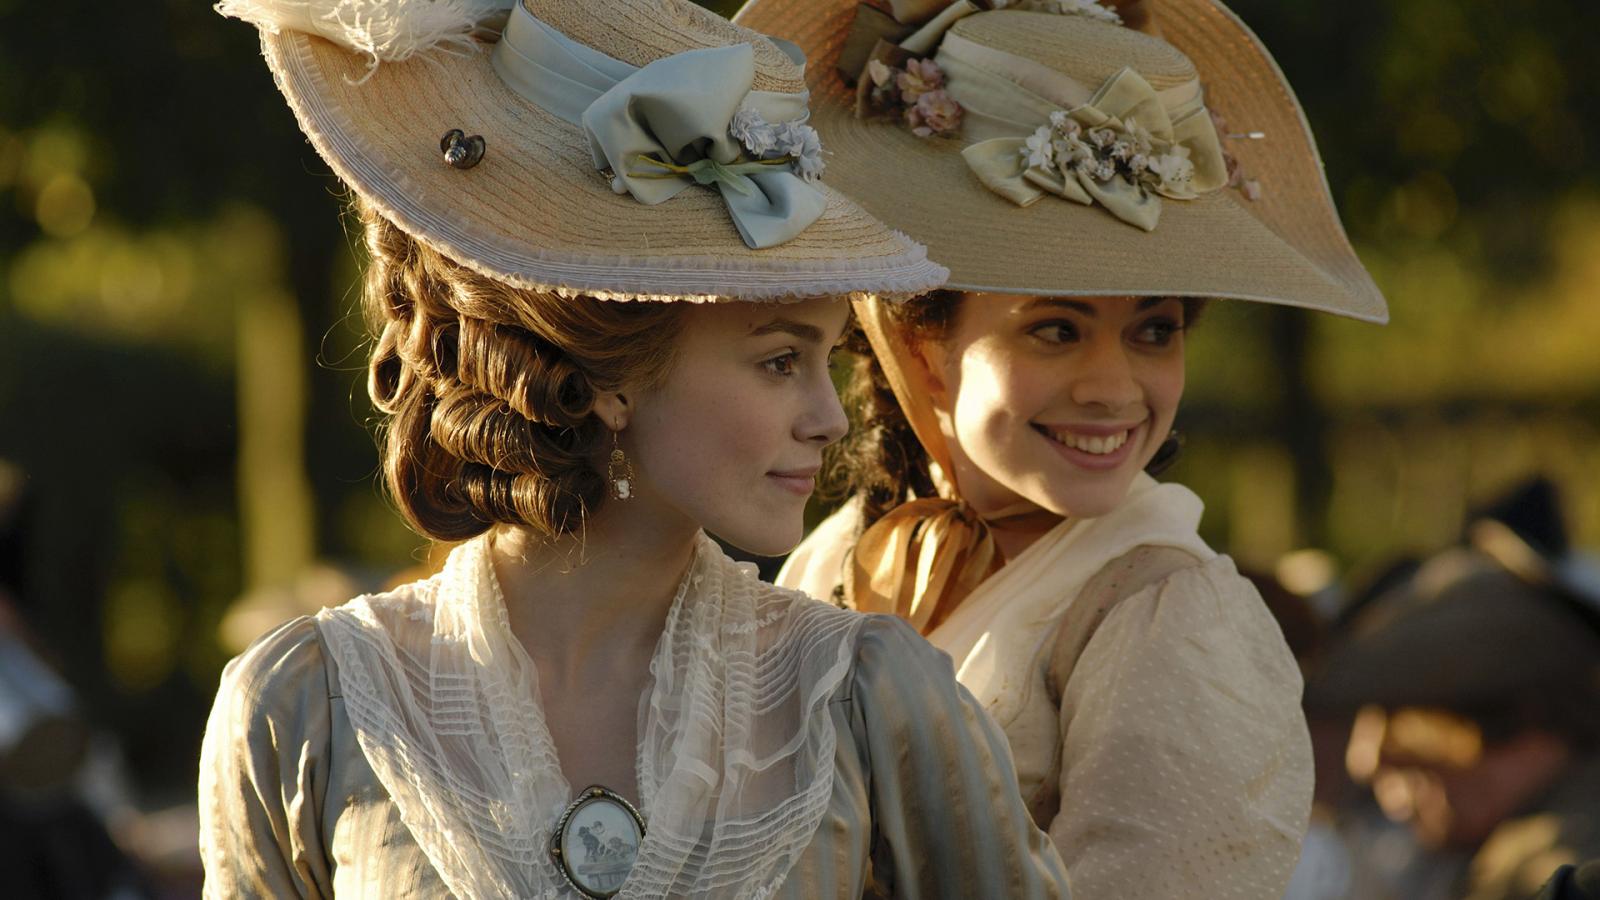 15 Historical Dramas that Capture the Pride and Prejudice Vibe - image 7